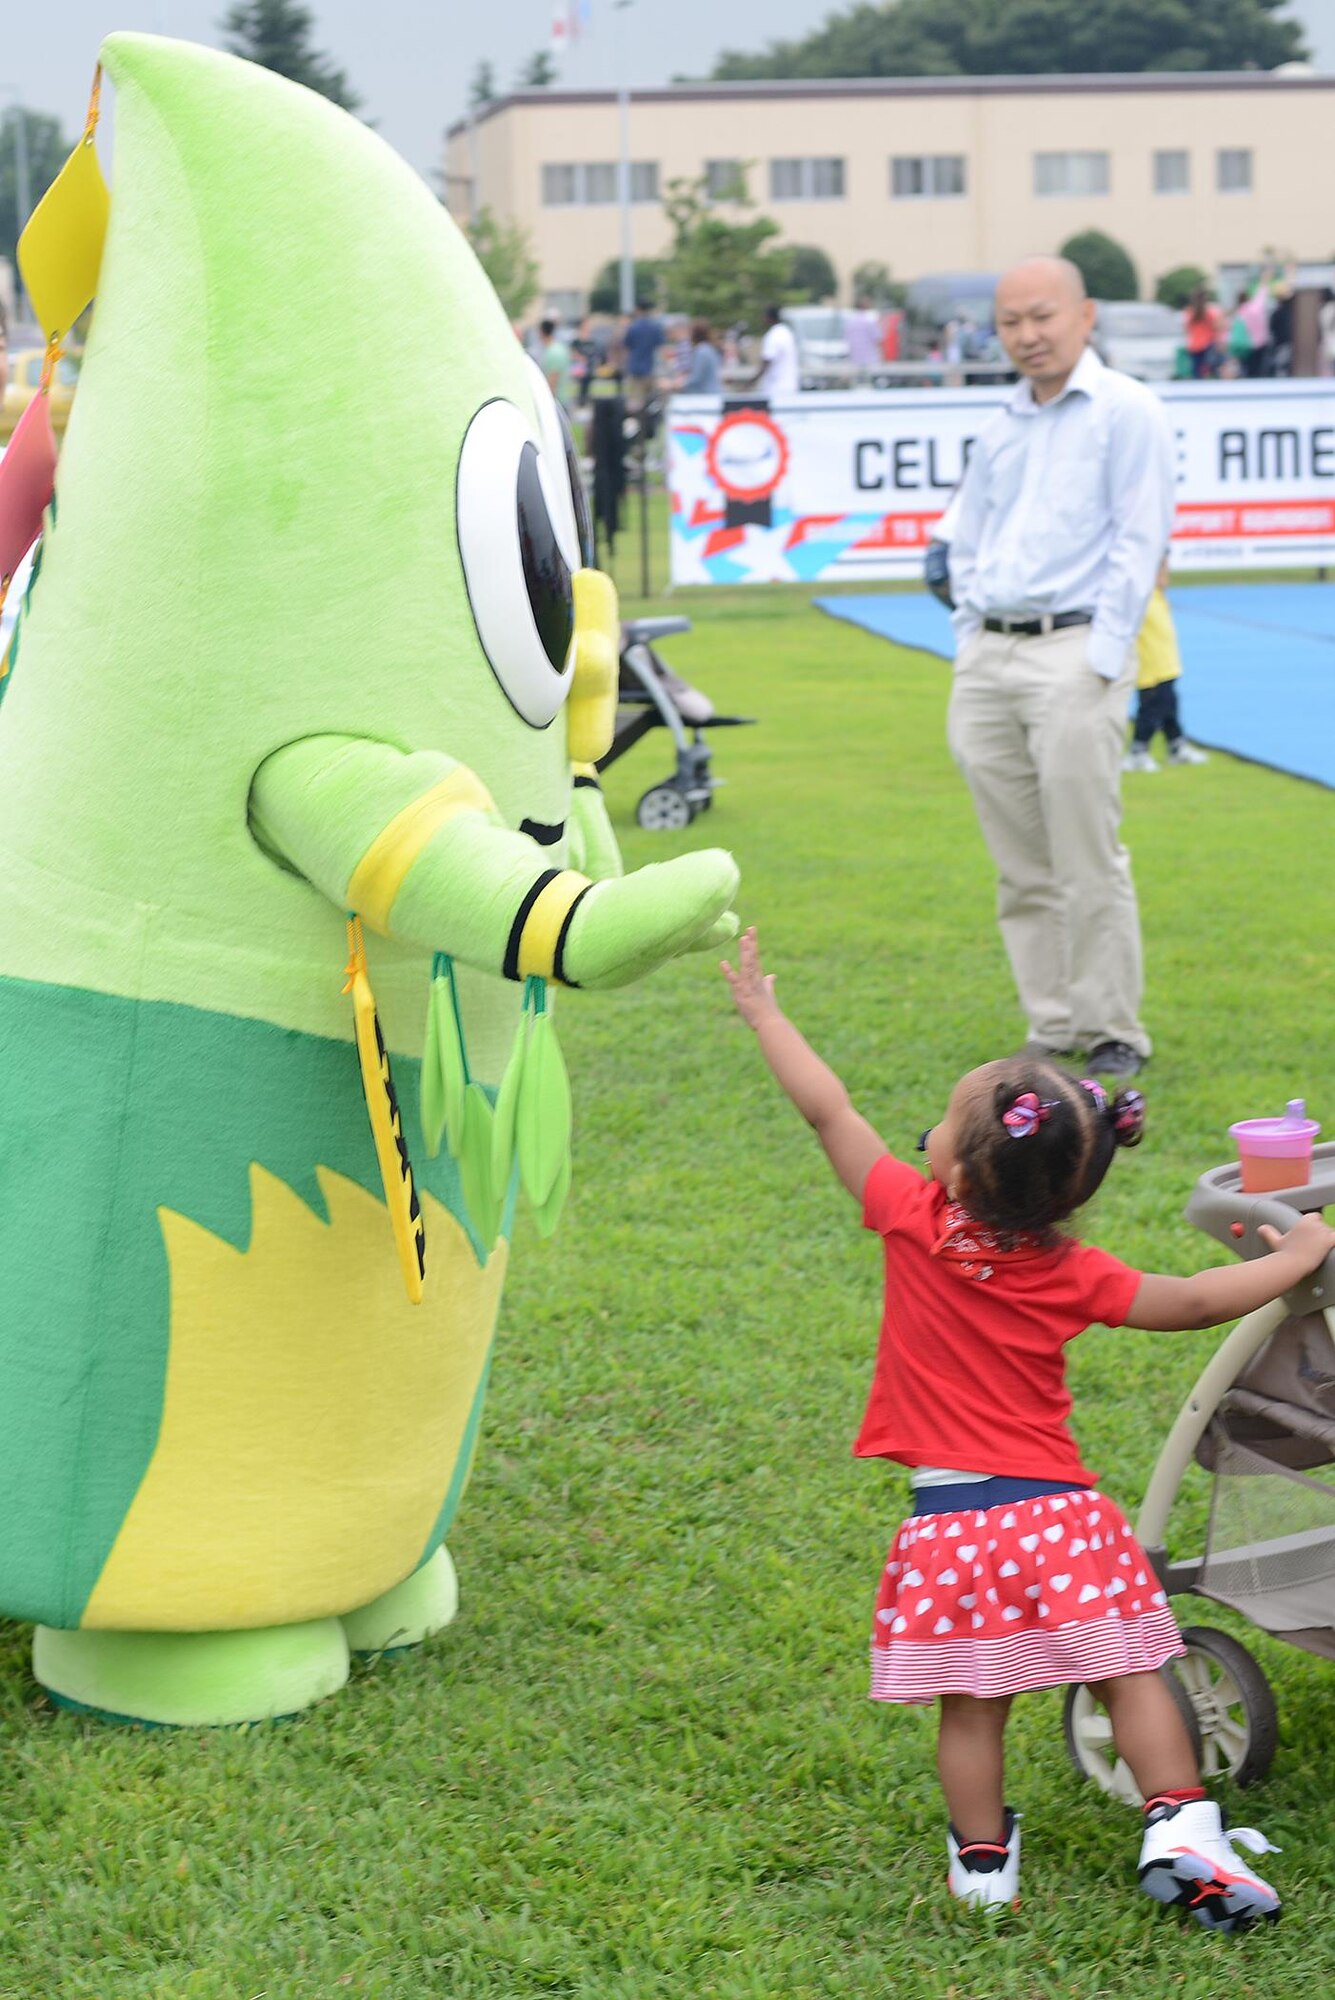 A child high-fives Takke the bamboo, mascot for Fussa city, during the Celebrate America at Yokota Air Base, Japan, July 2, 2015. Yokota borders five municipal cities, each with their own mascot. (U.S. Air Force photo by Airman 1st Class David C. Danford/Released)